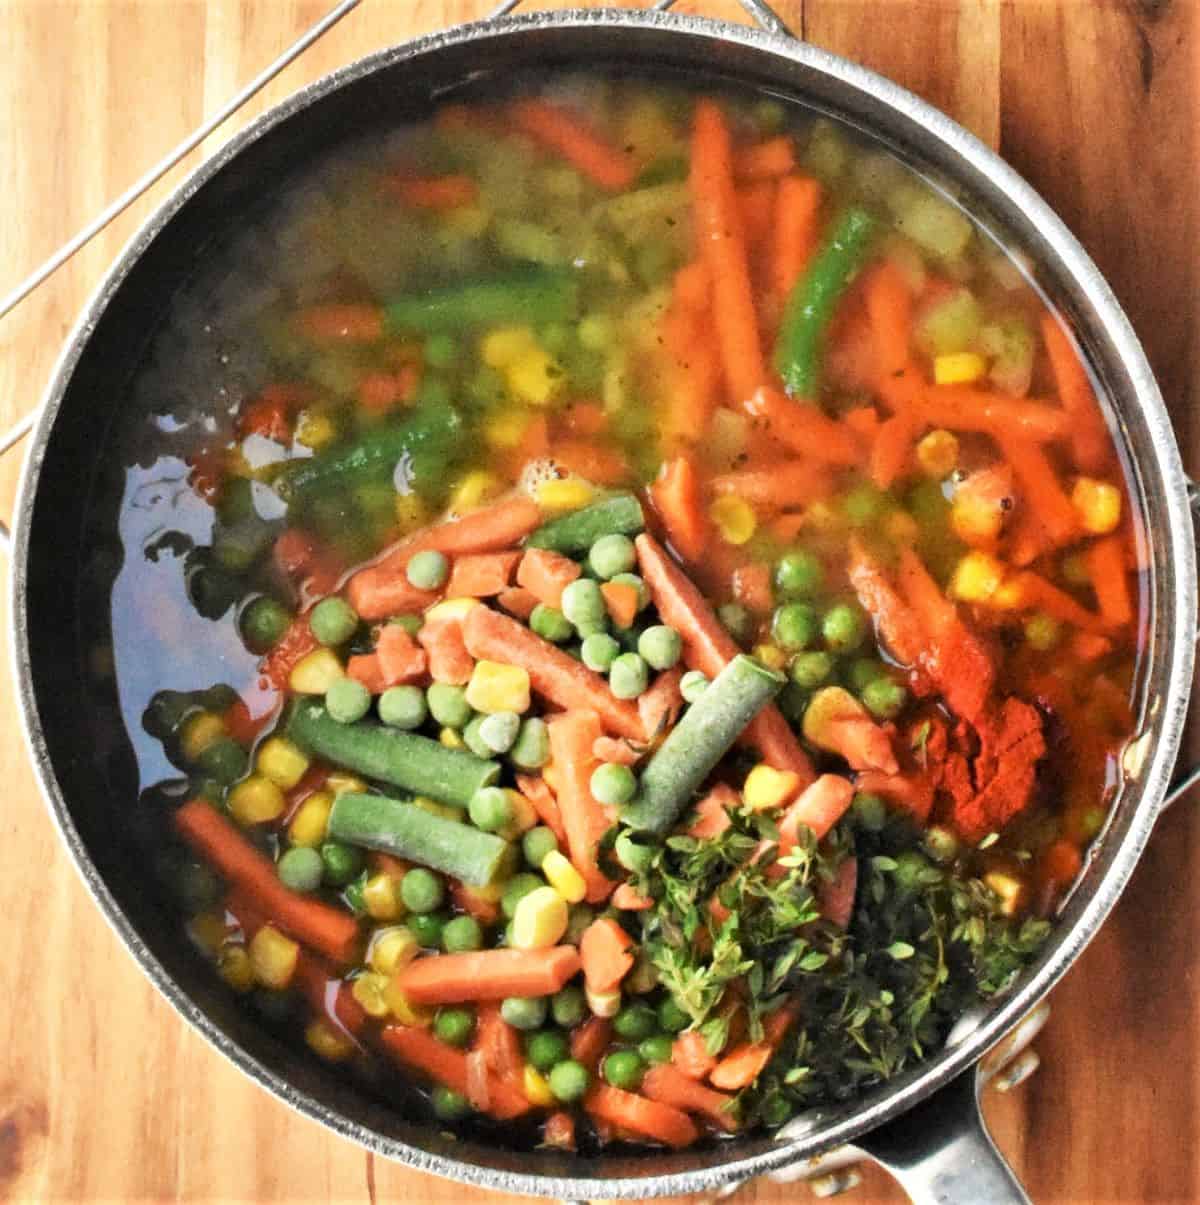 Top down view of soup with vegetables in pot.